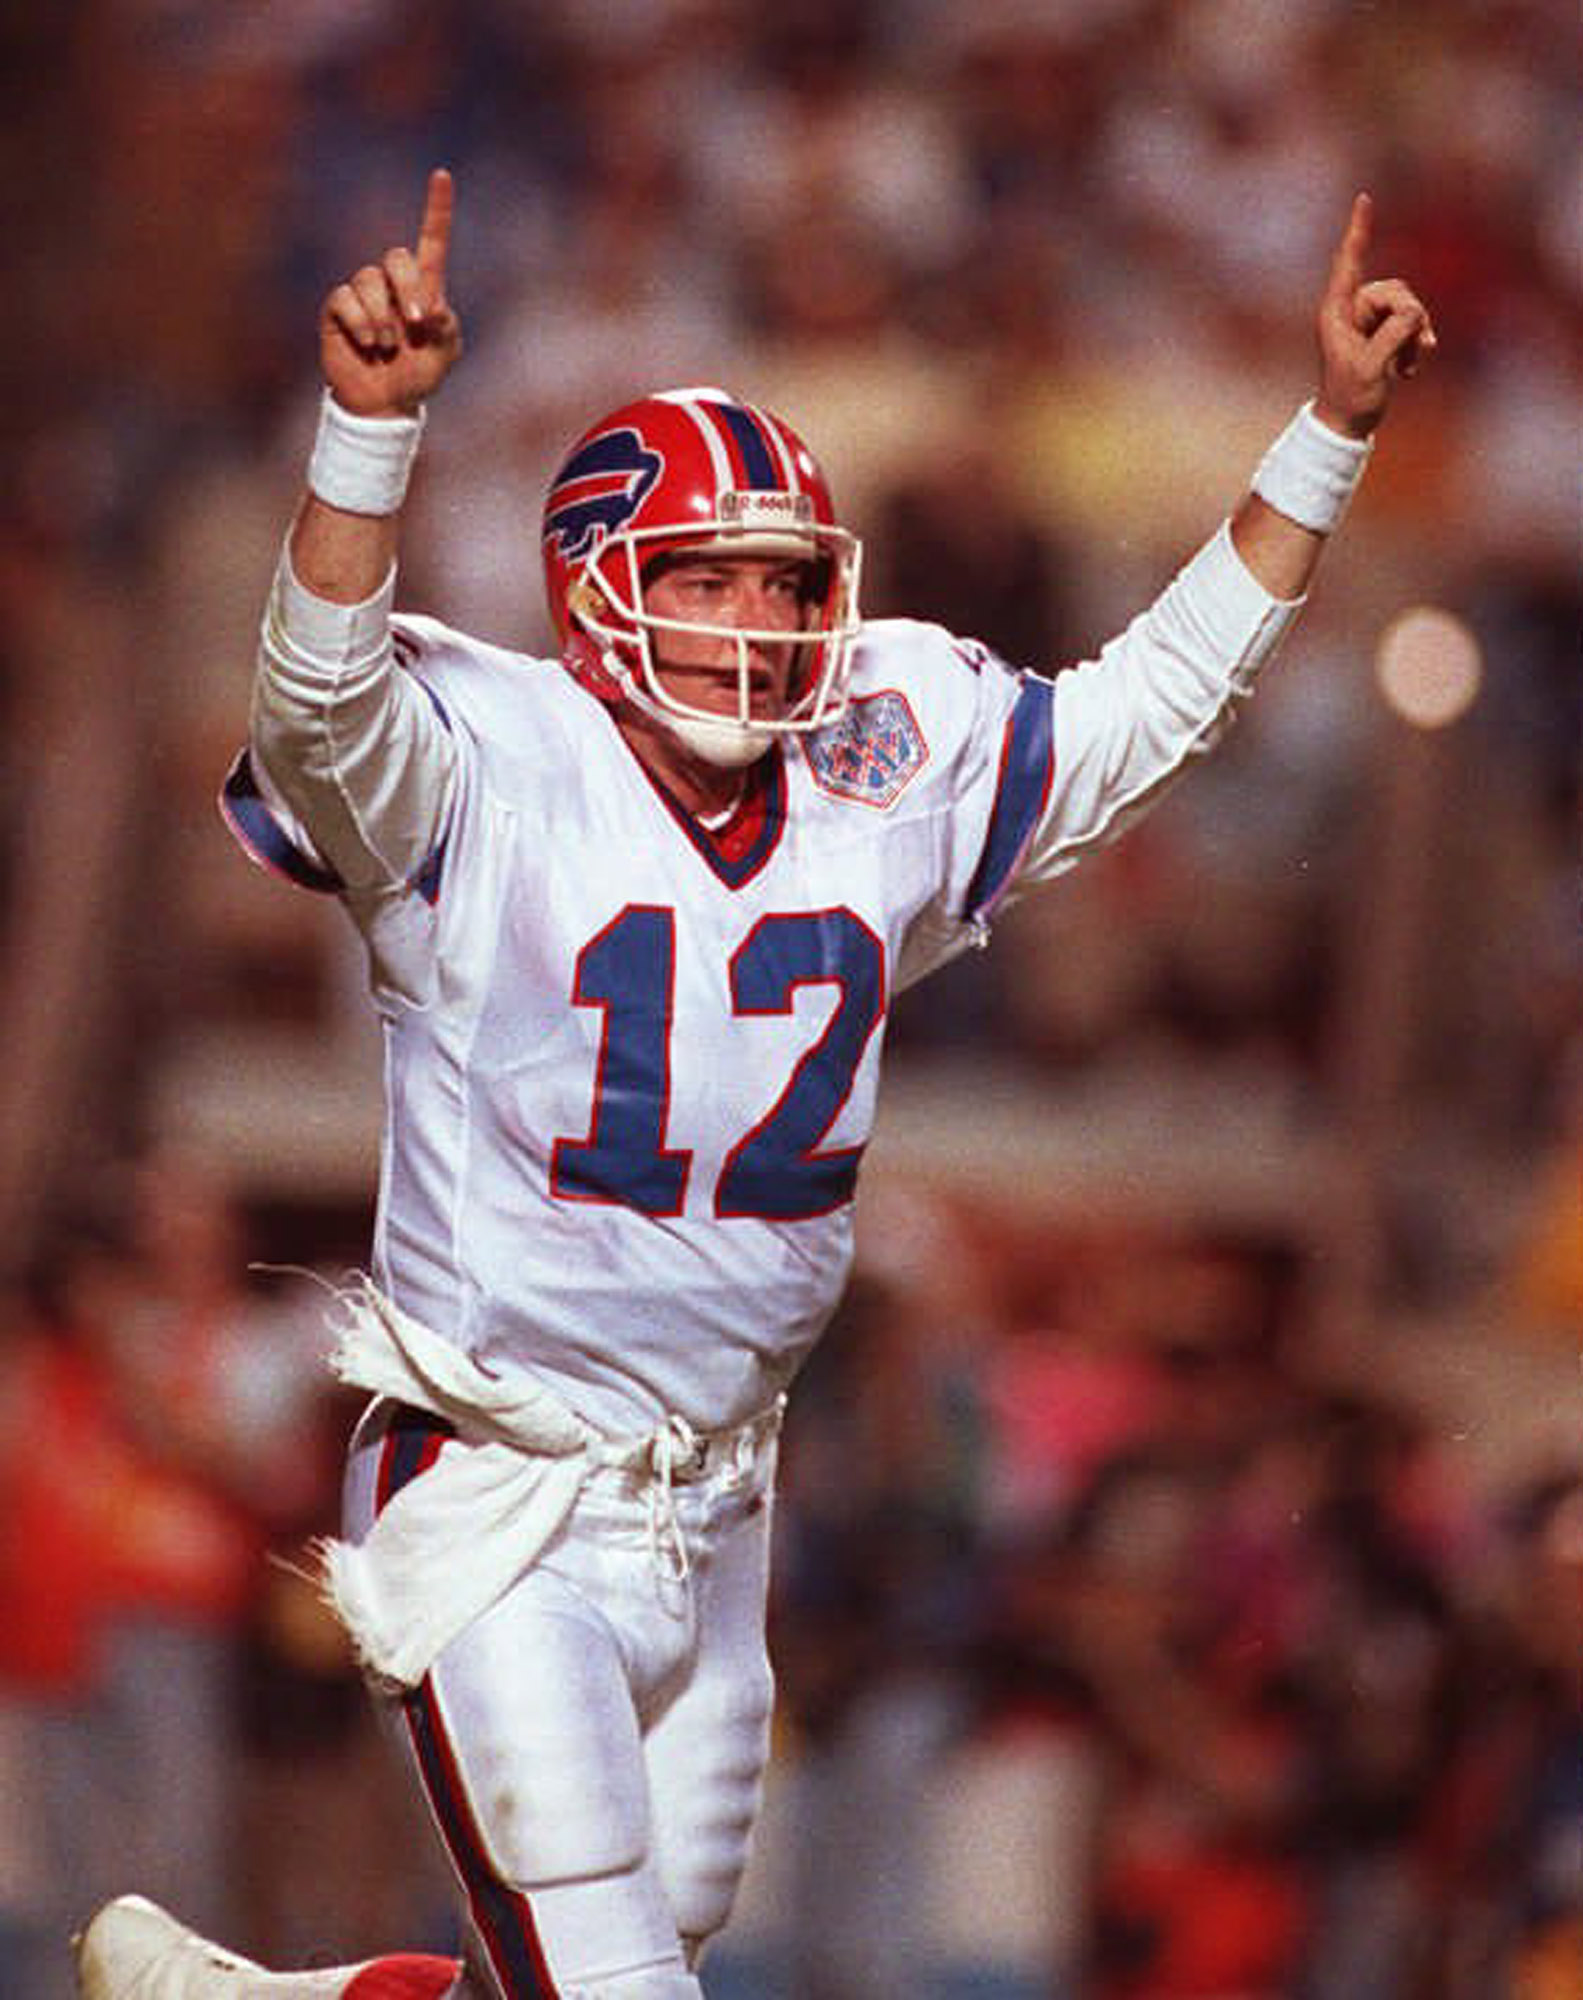 Bills Hall of Fame QB Jim Kelly talks about playing at The U, the USFL & why he originally didn't want to play in Buffalo on this segment of Thursday Night Tailgate